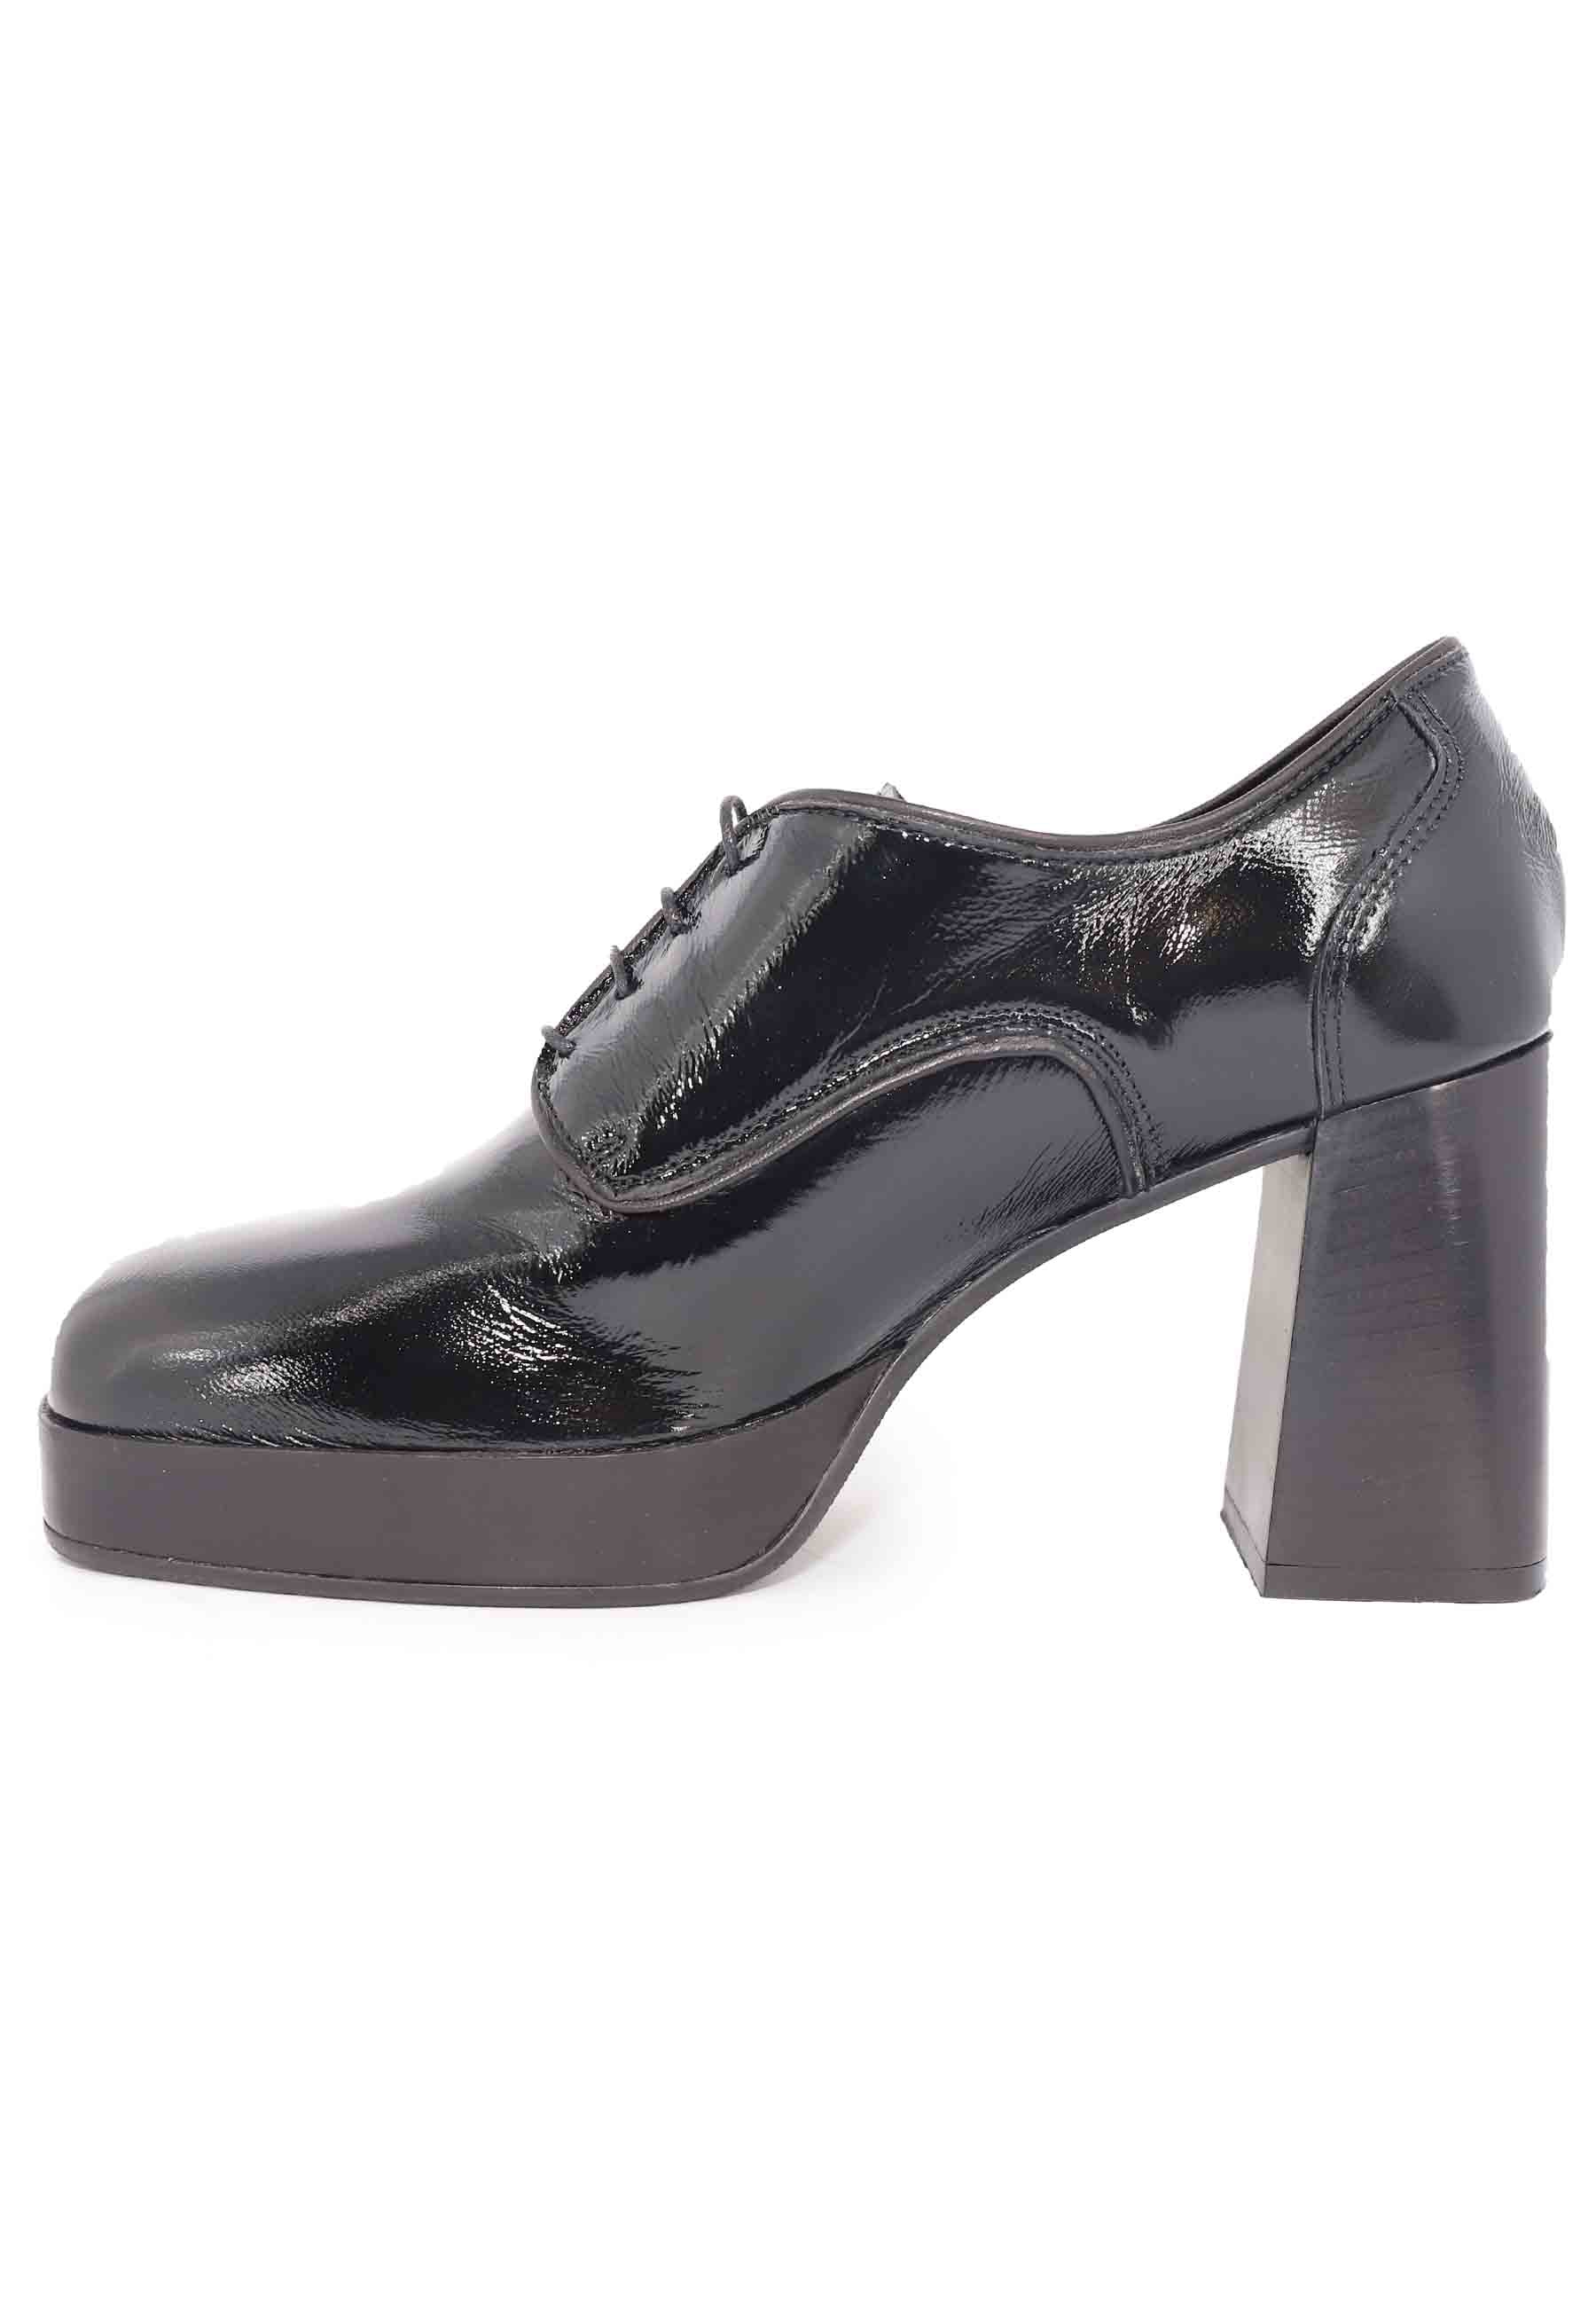 Women's black patent leather lace-ups with high heel and platform